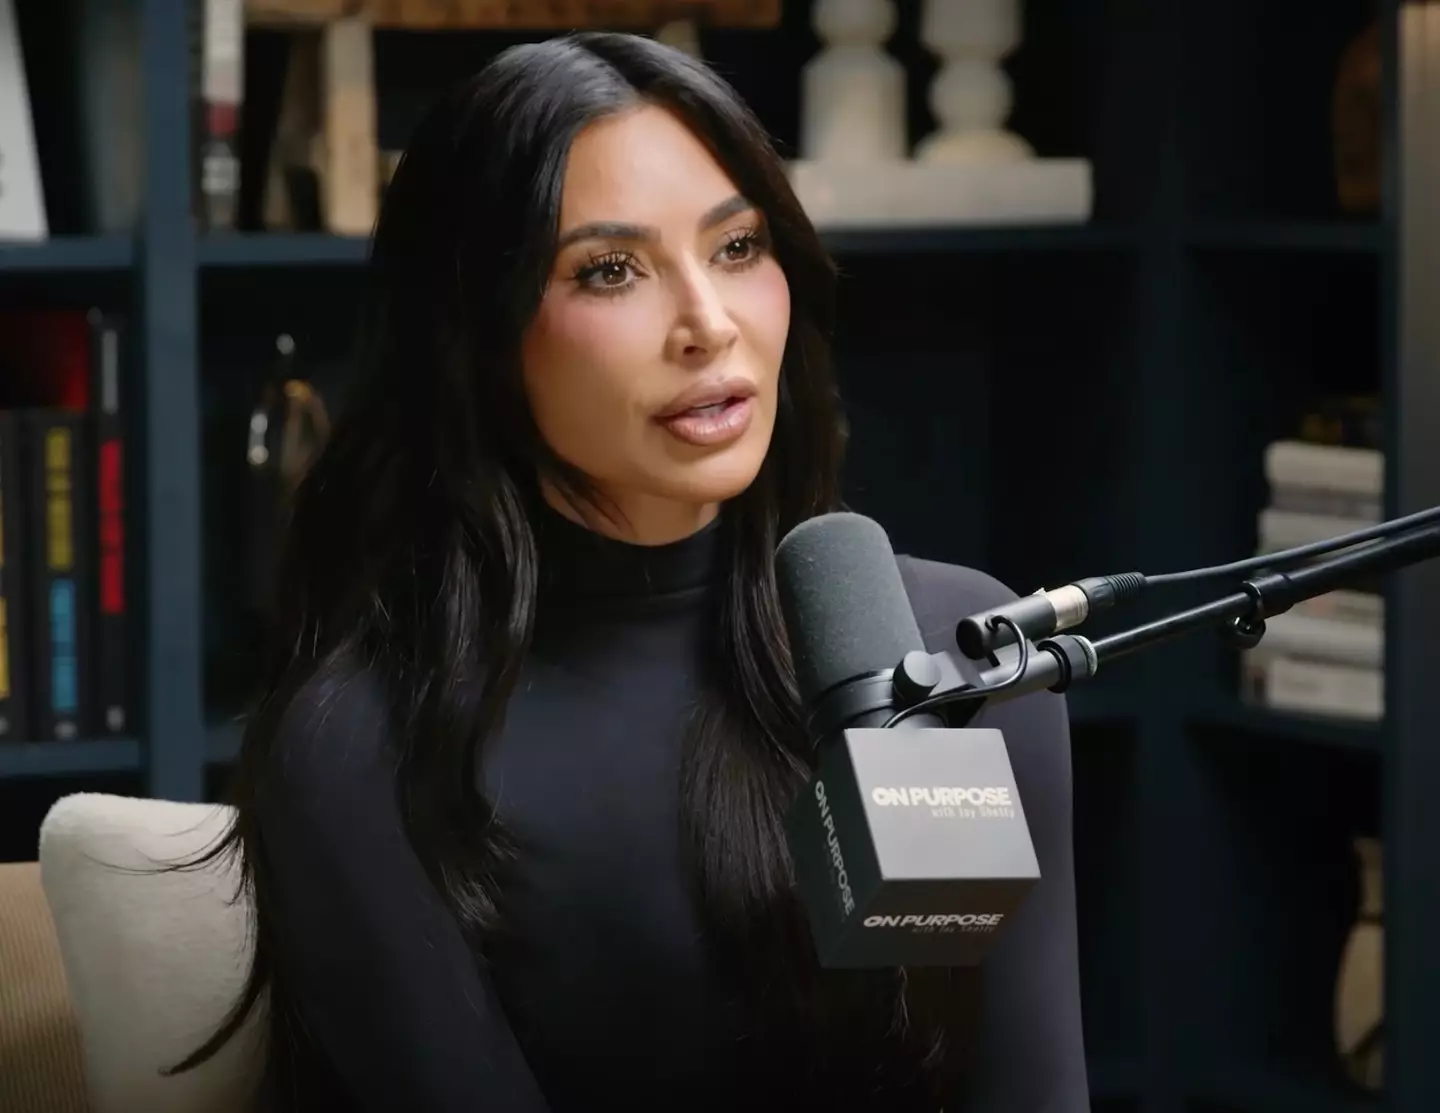 Kim Kardashian opened up about the difficulties of being a global star.